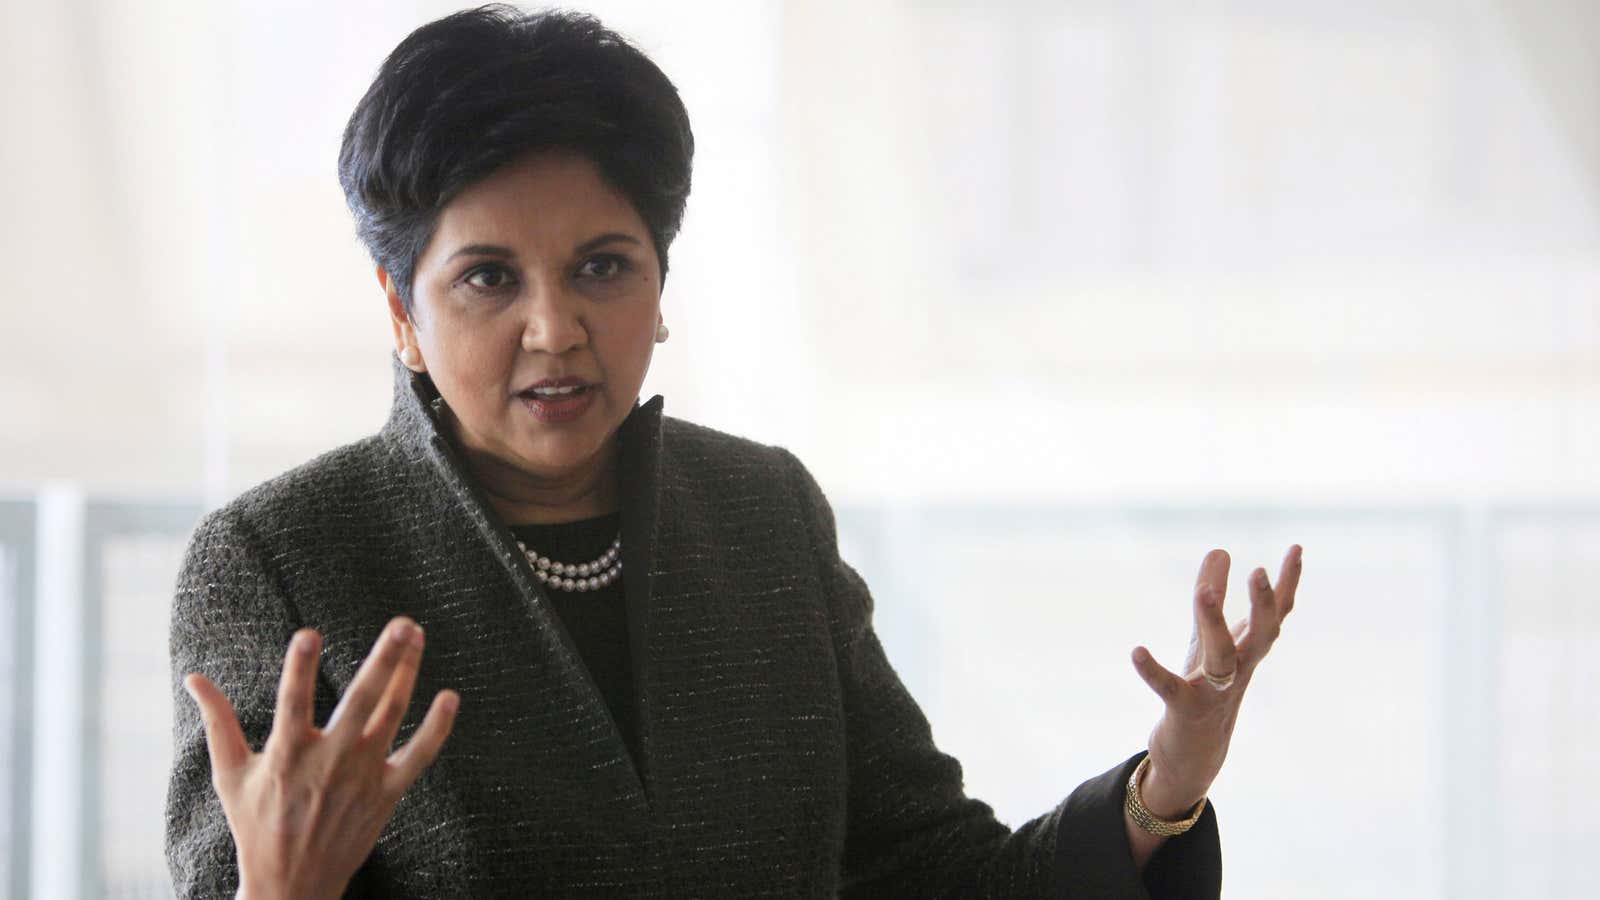 Indra Nooyi, PepsiCo’s CEO, was once the company’s finance chief.